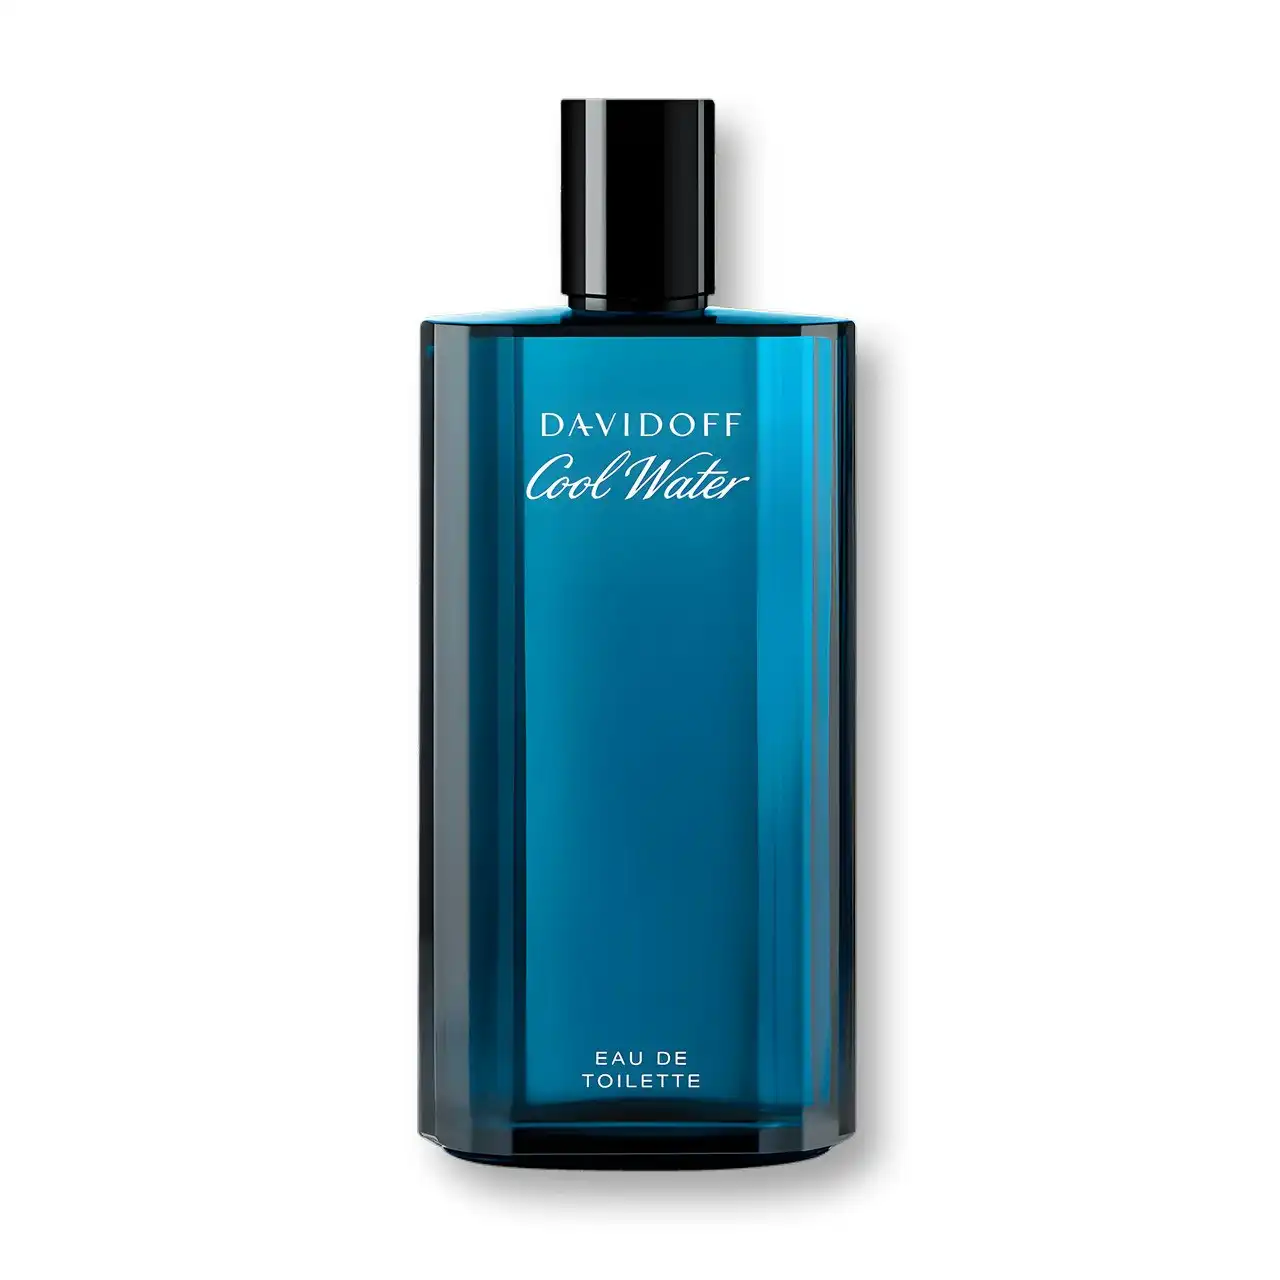 Coolwater 200ml EDT By Davidoff (Mens)